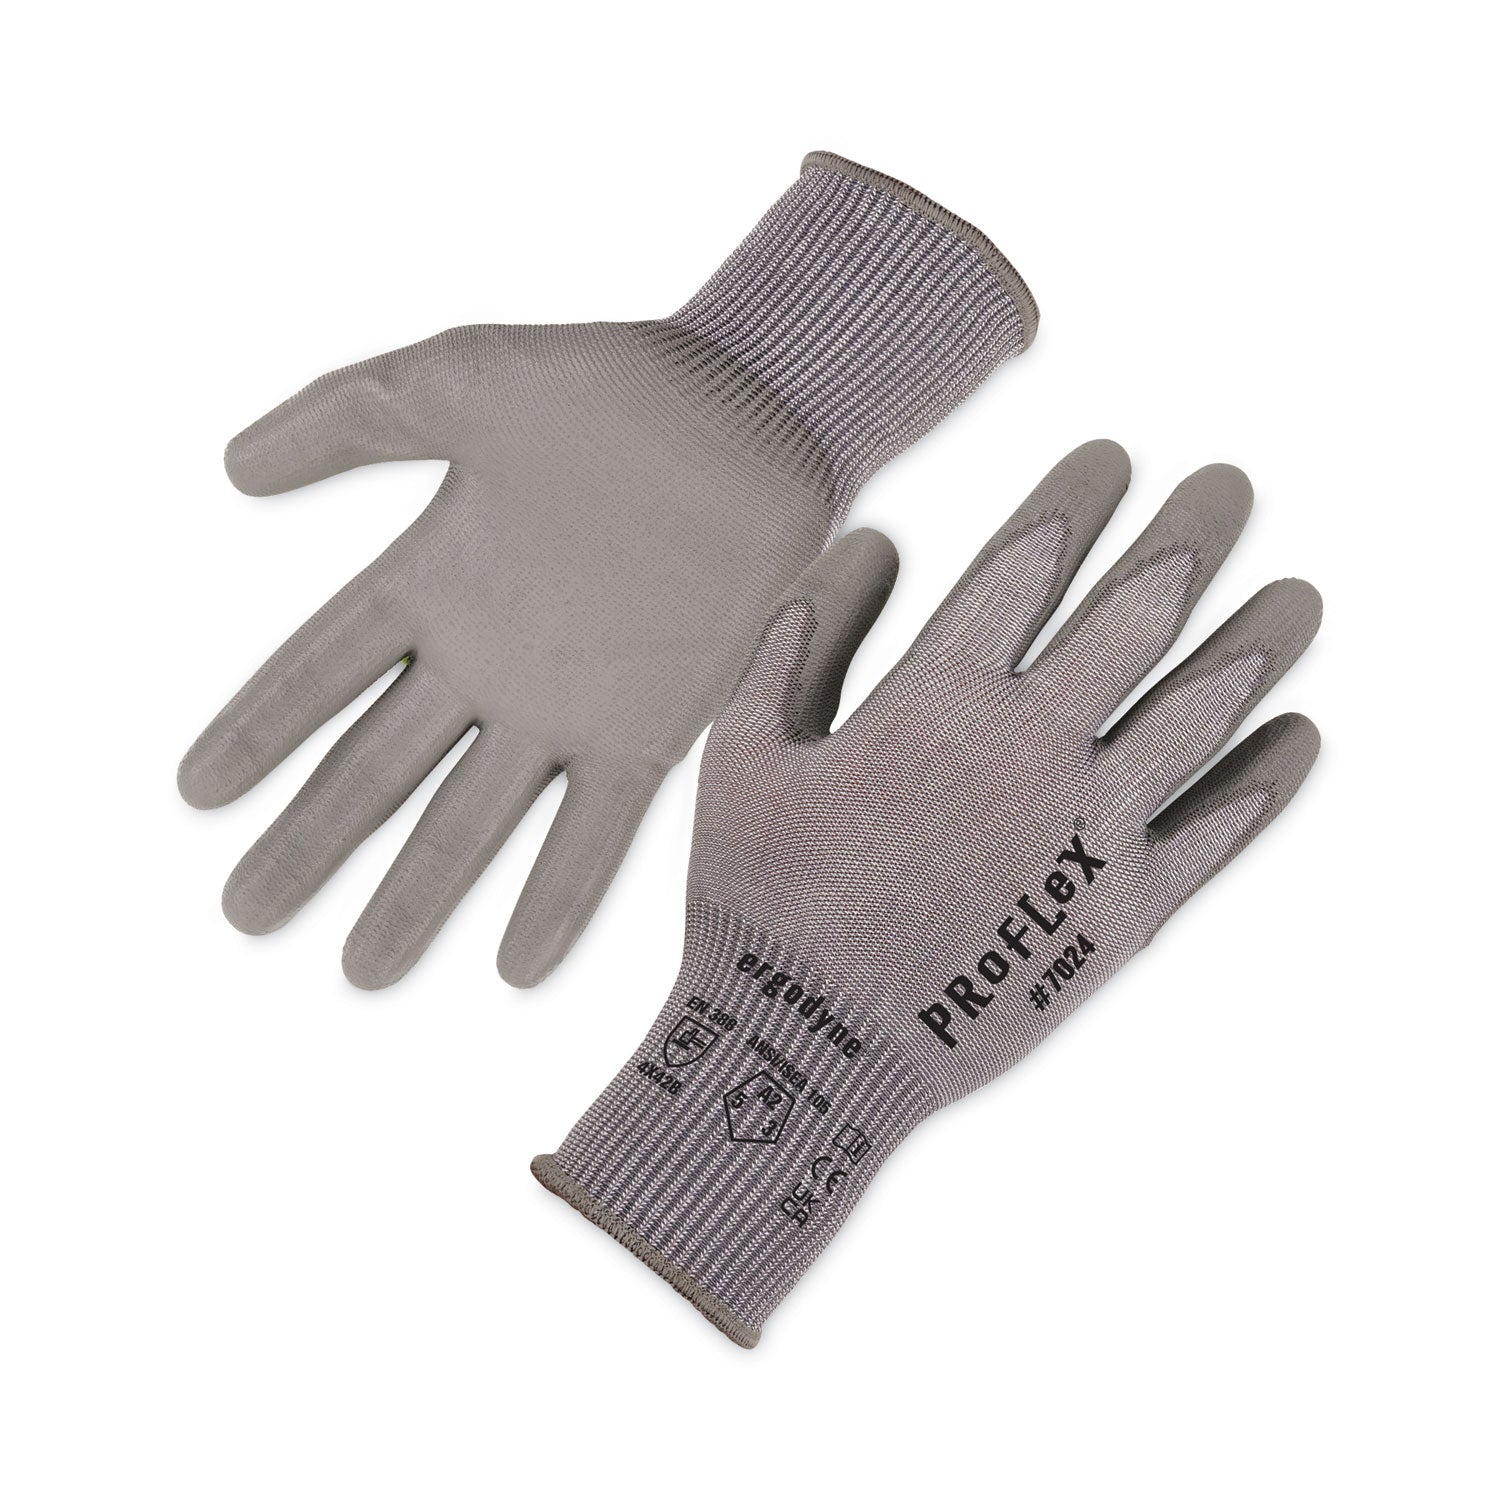 proflex-7024-ansi-a2-pu-coated-cr-gloves-gray-medium-12-pairs-pack-ships-in-1-3-business-days_ego10393 - 1